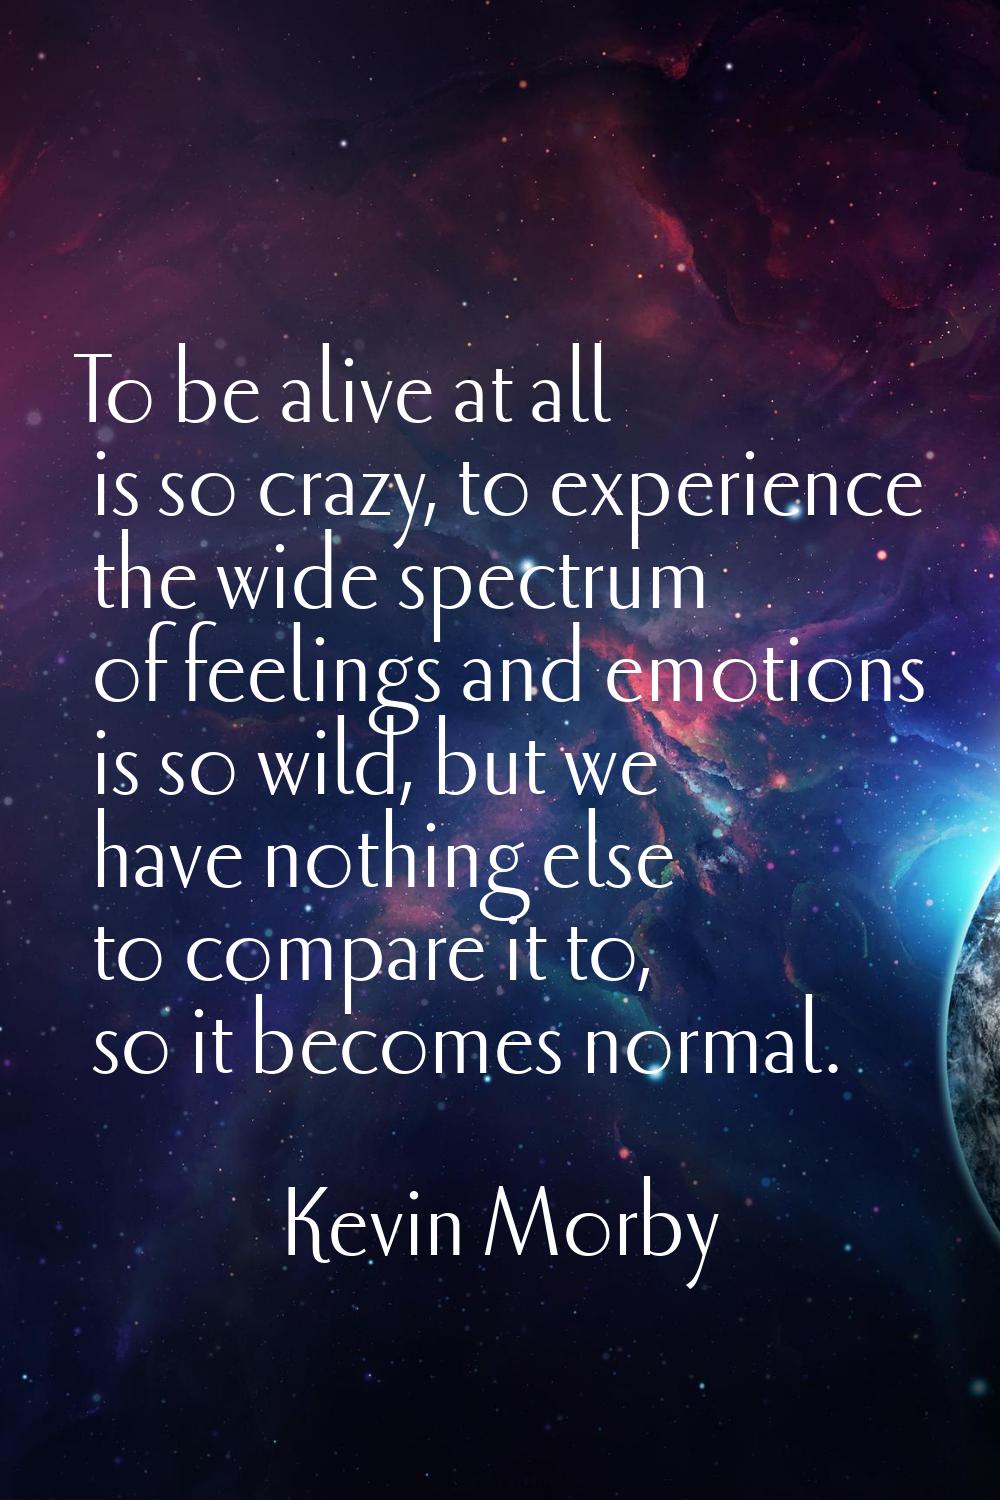 To be alive at all is so crazy, to experience the wide spectrum of feelings and emotions is so wild